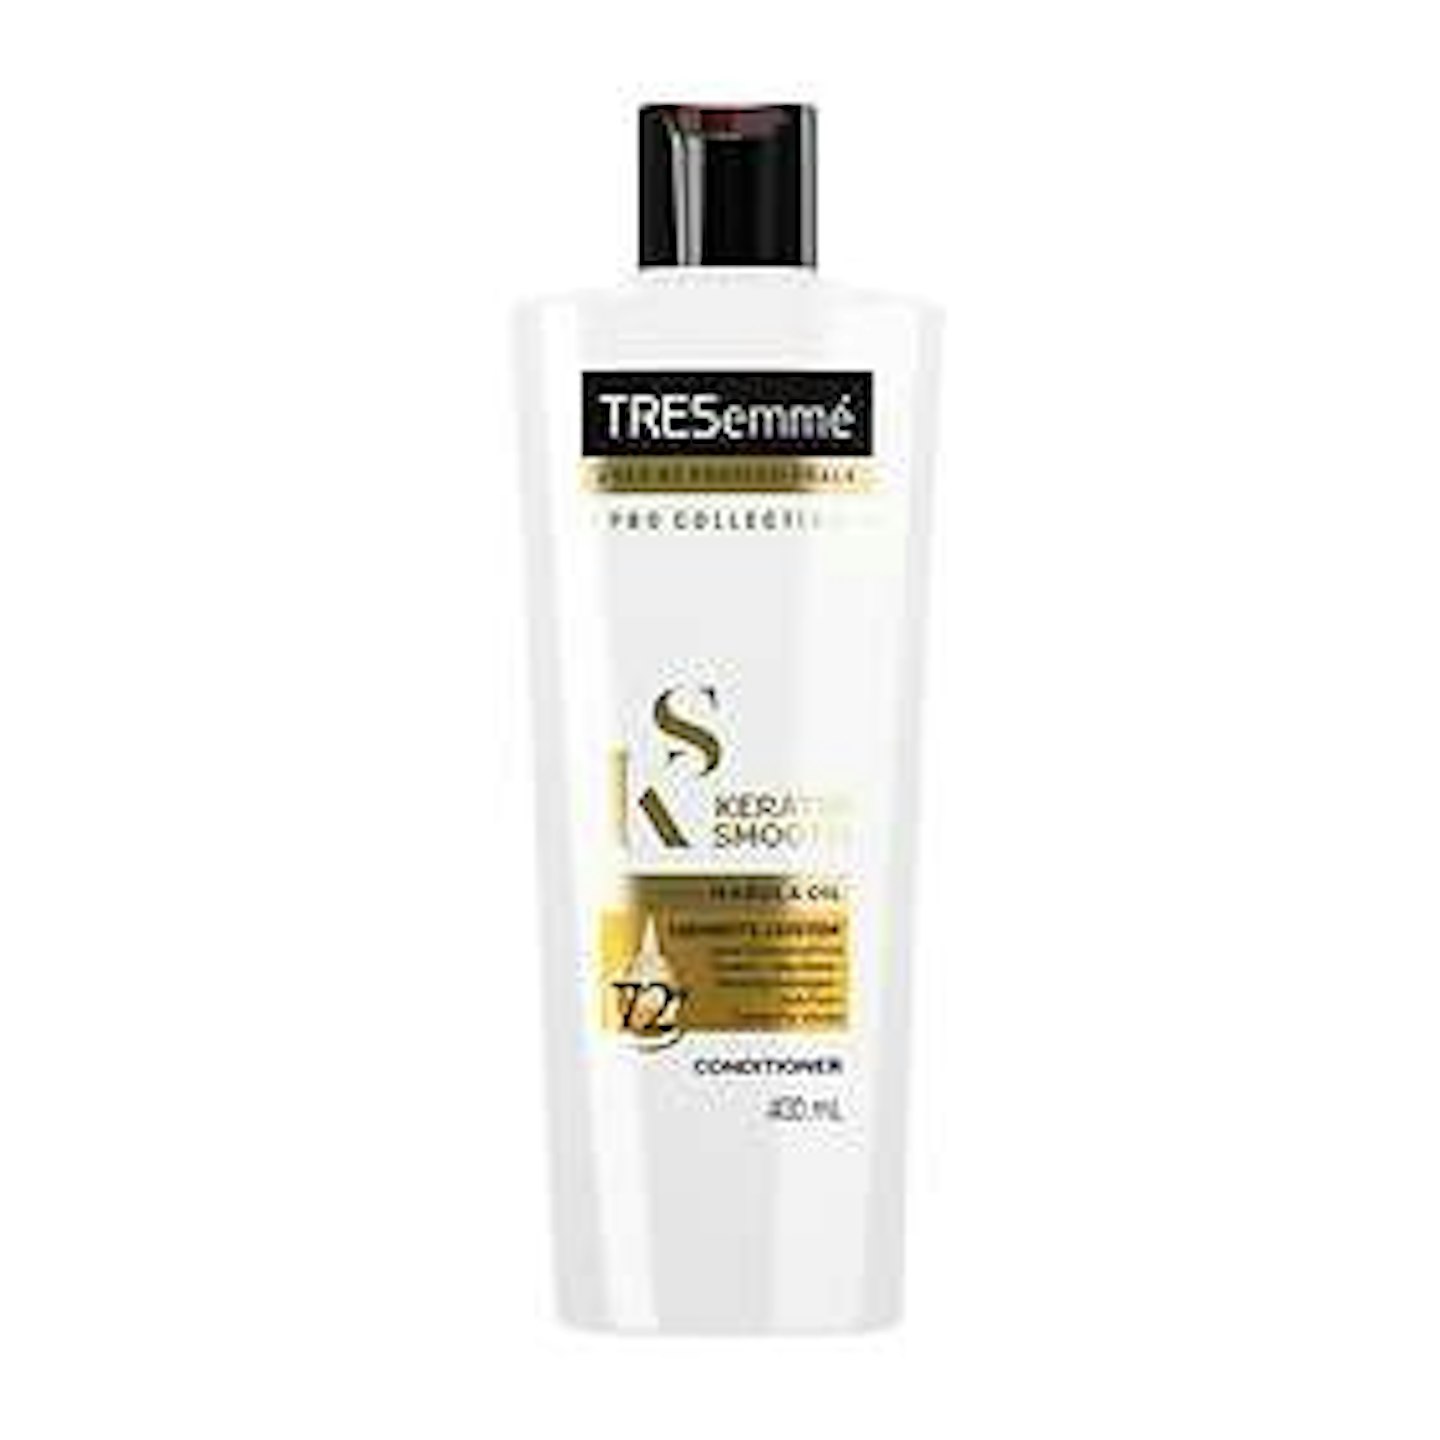 TRESemme Keratin Smooth Conditioner, £4.99